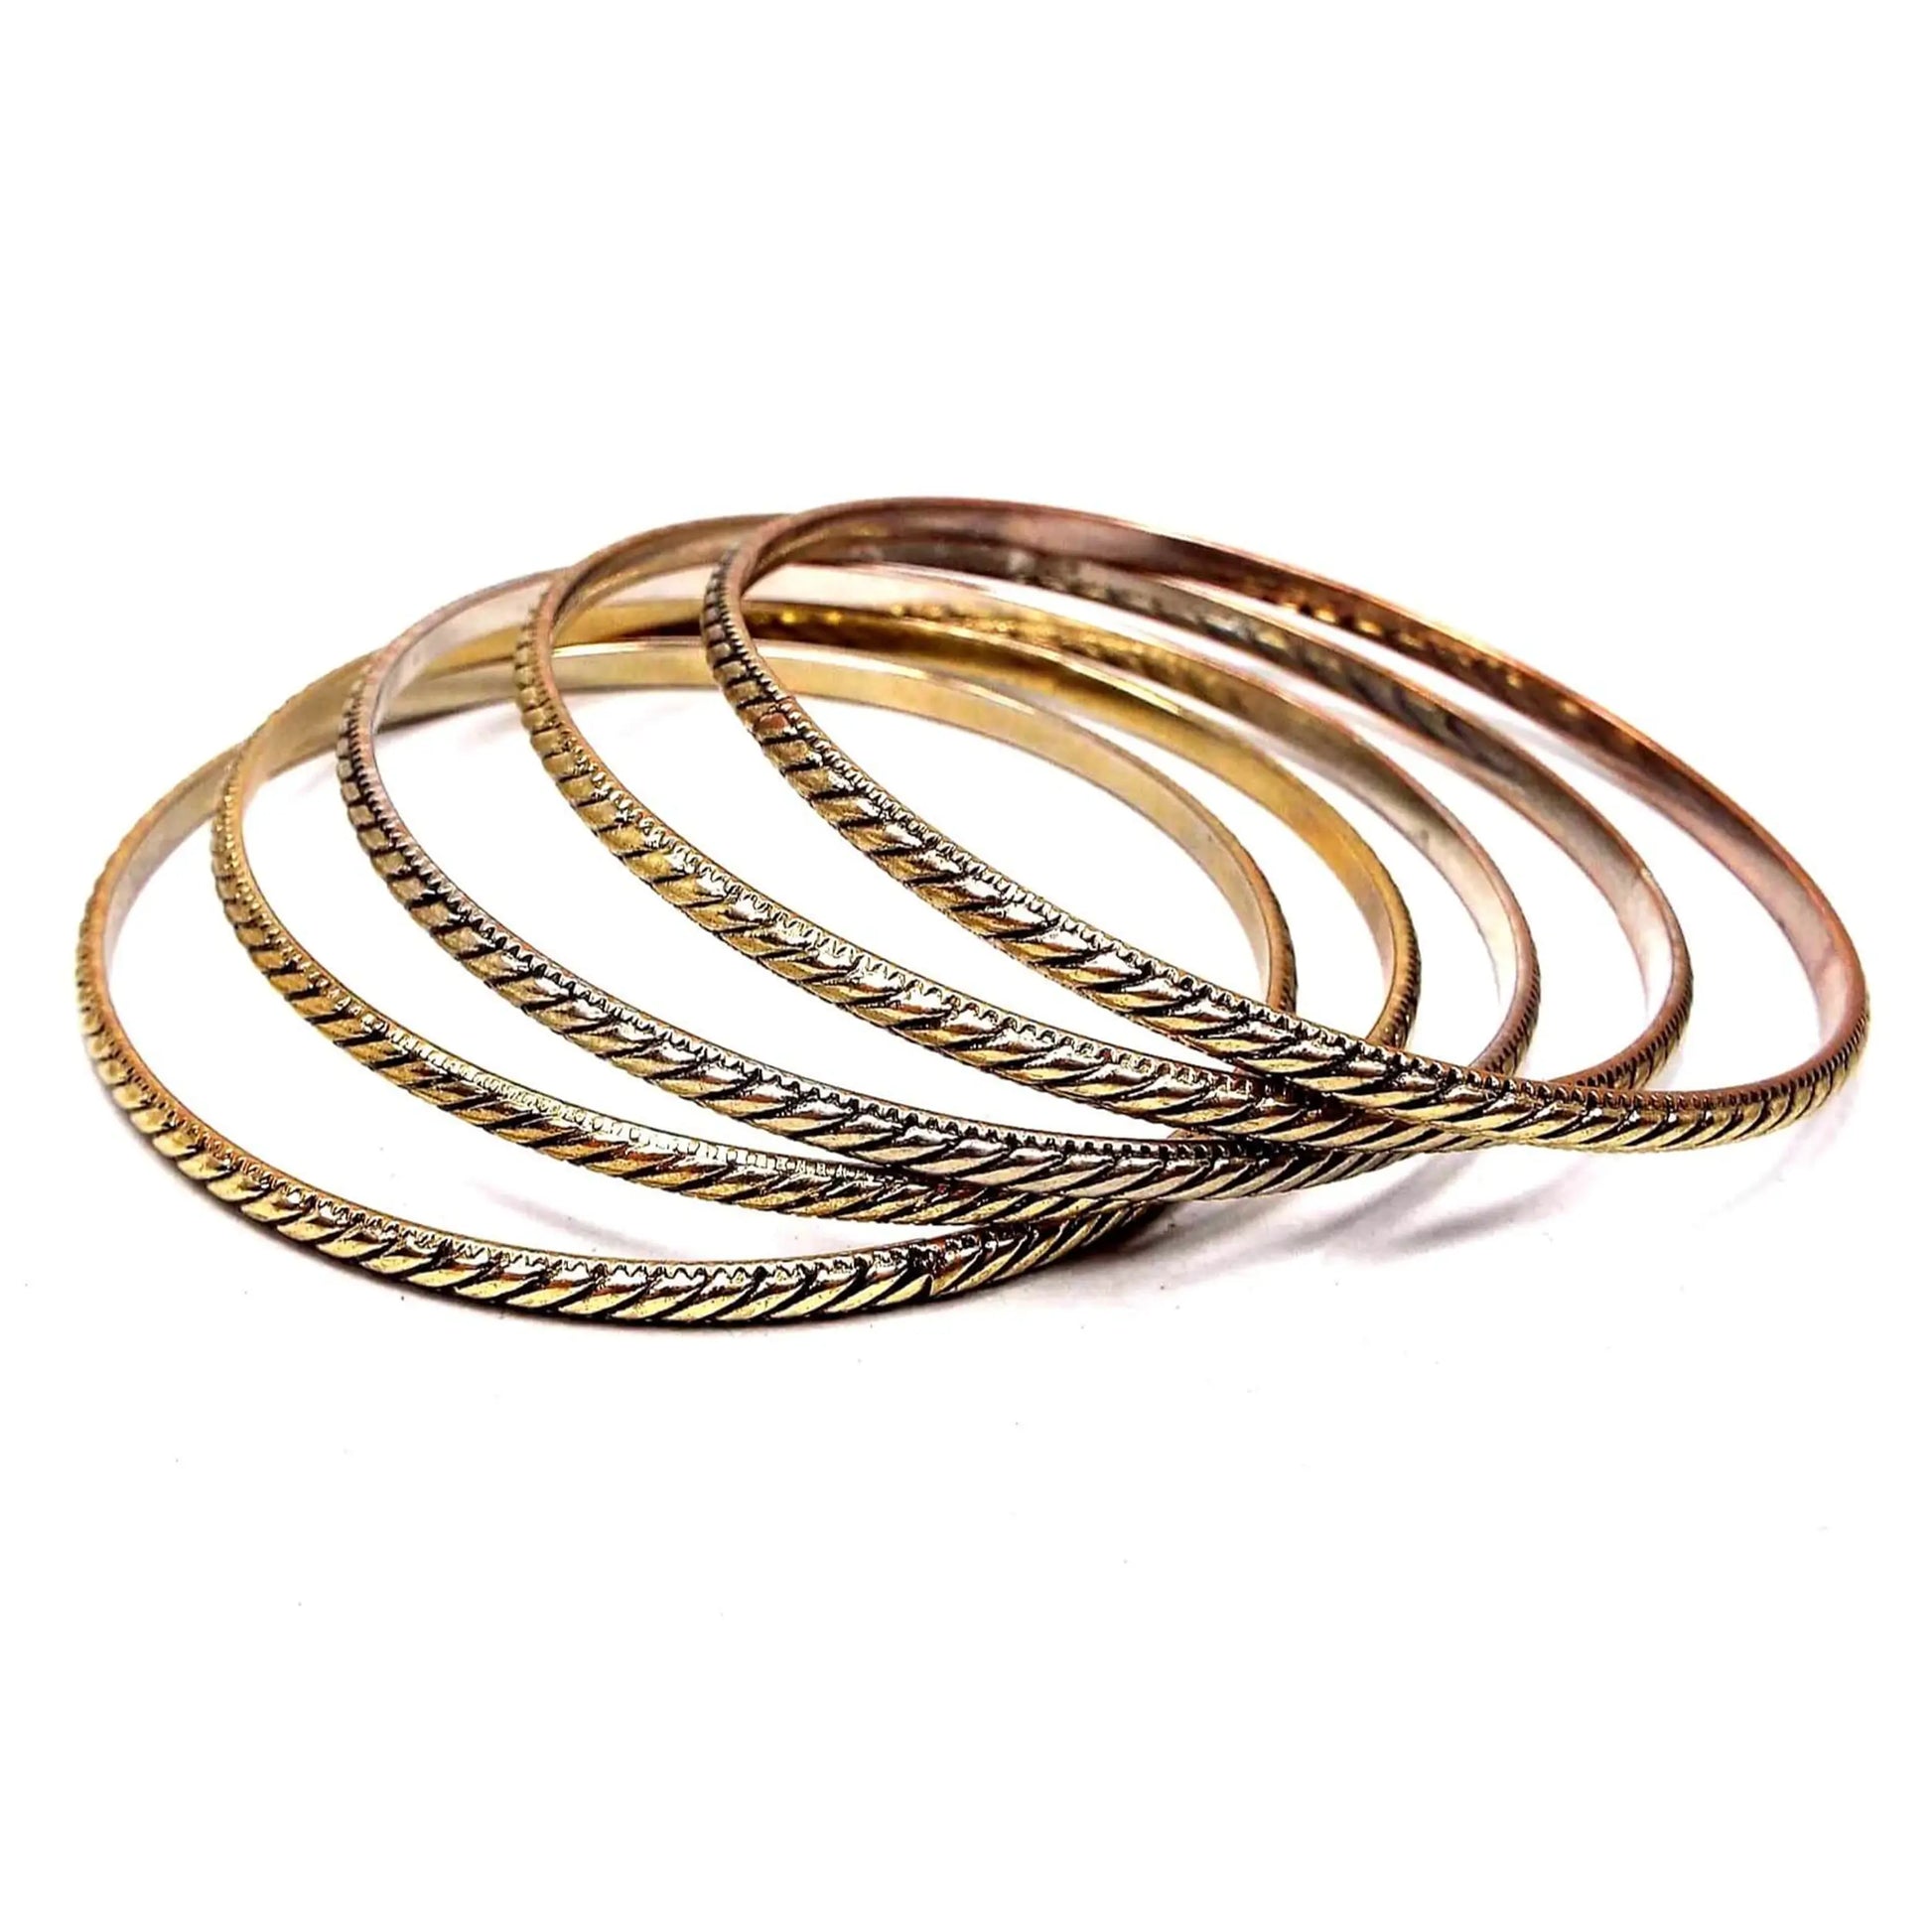 Angled view of the stack of five retro vintage bangle bracelets. They are gold tone in color with black diagonal lines. Each is thinner in width to make them good for stacking together.